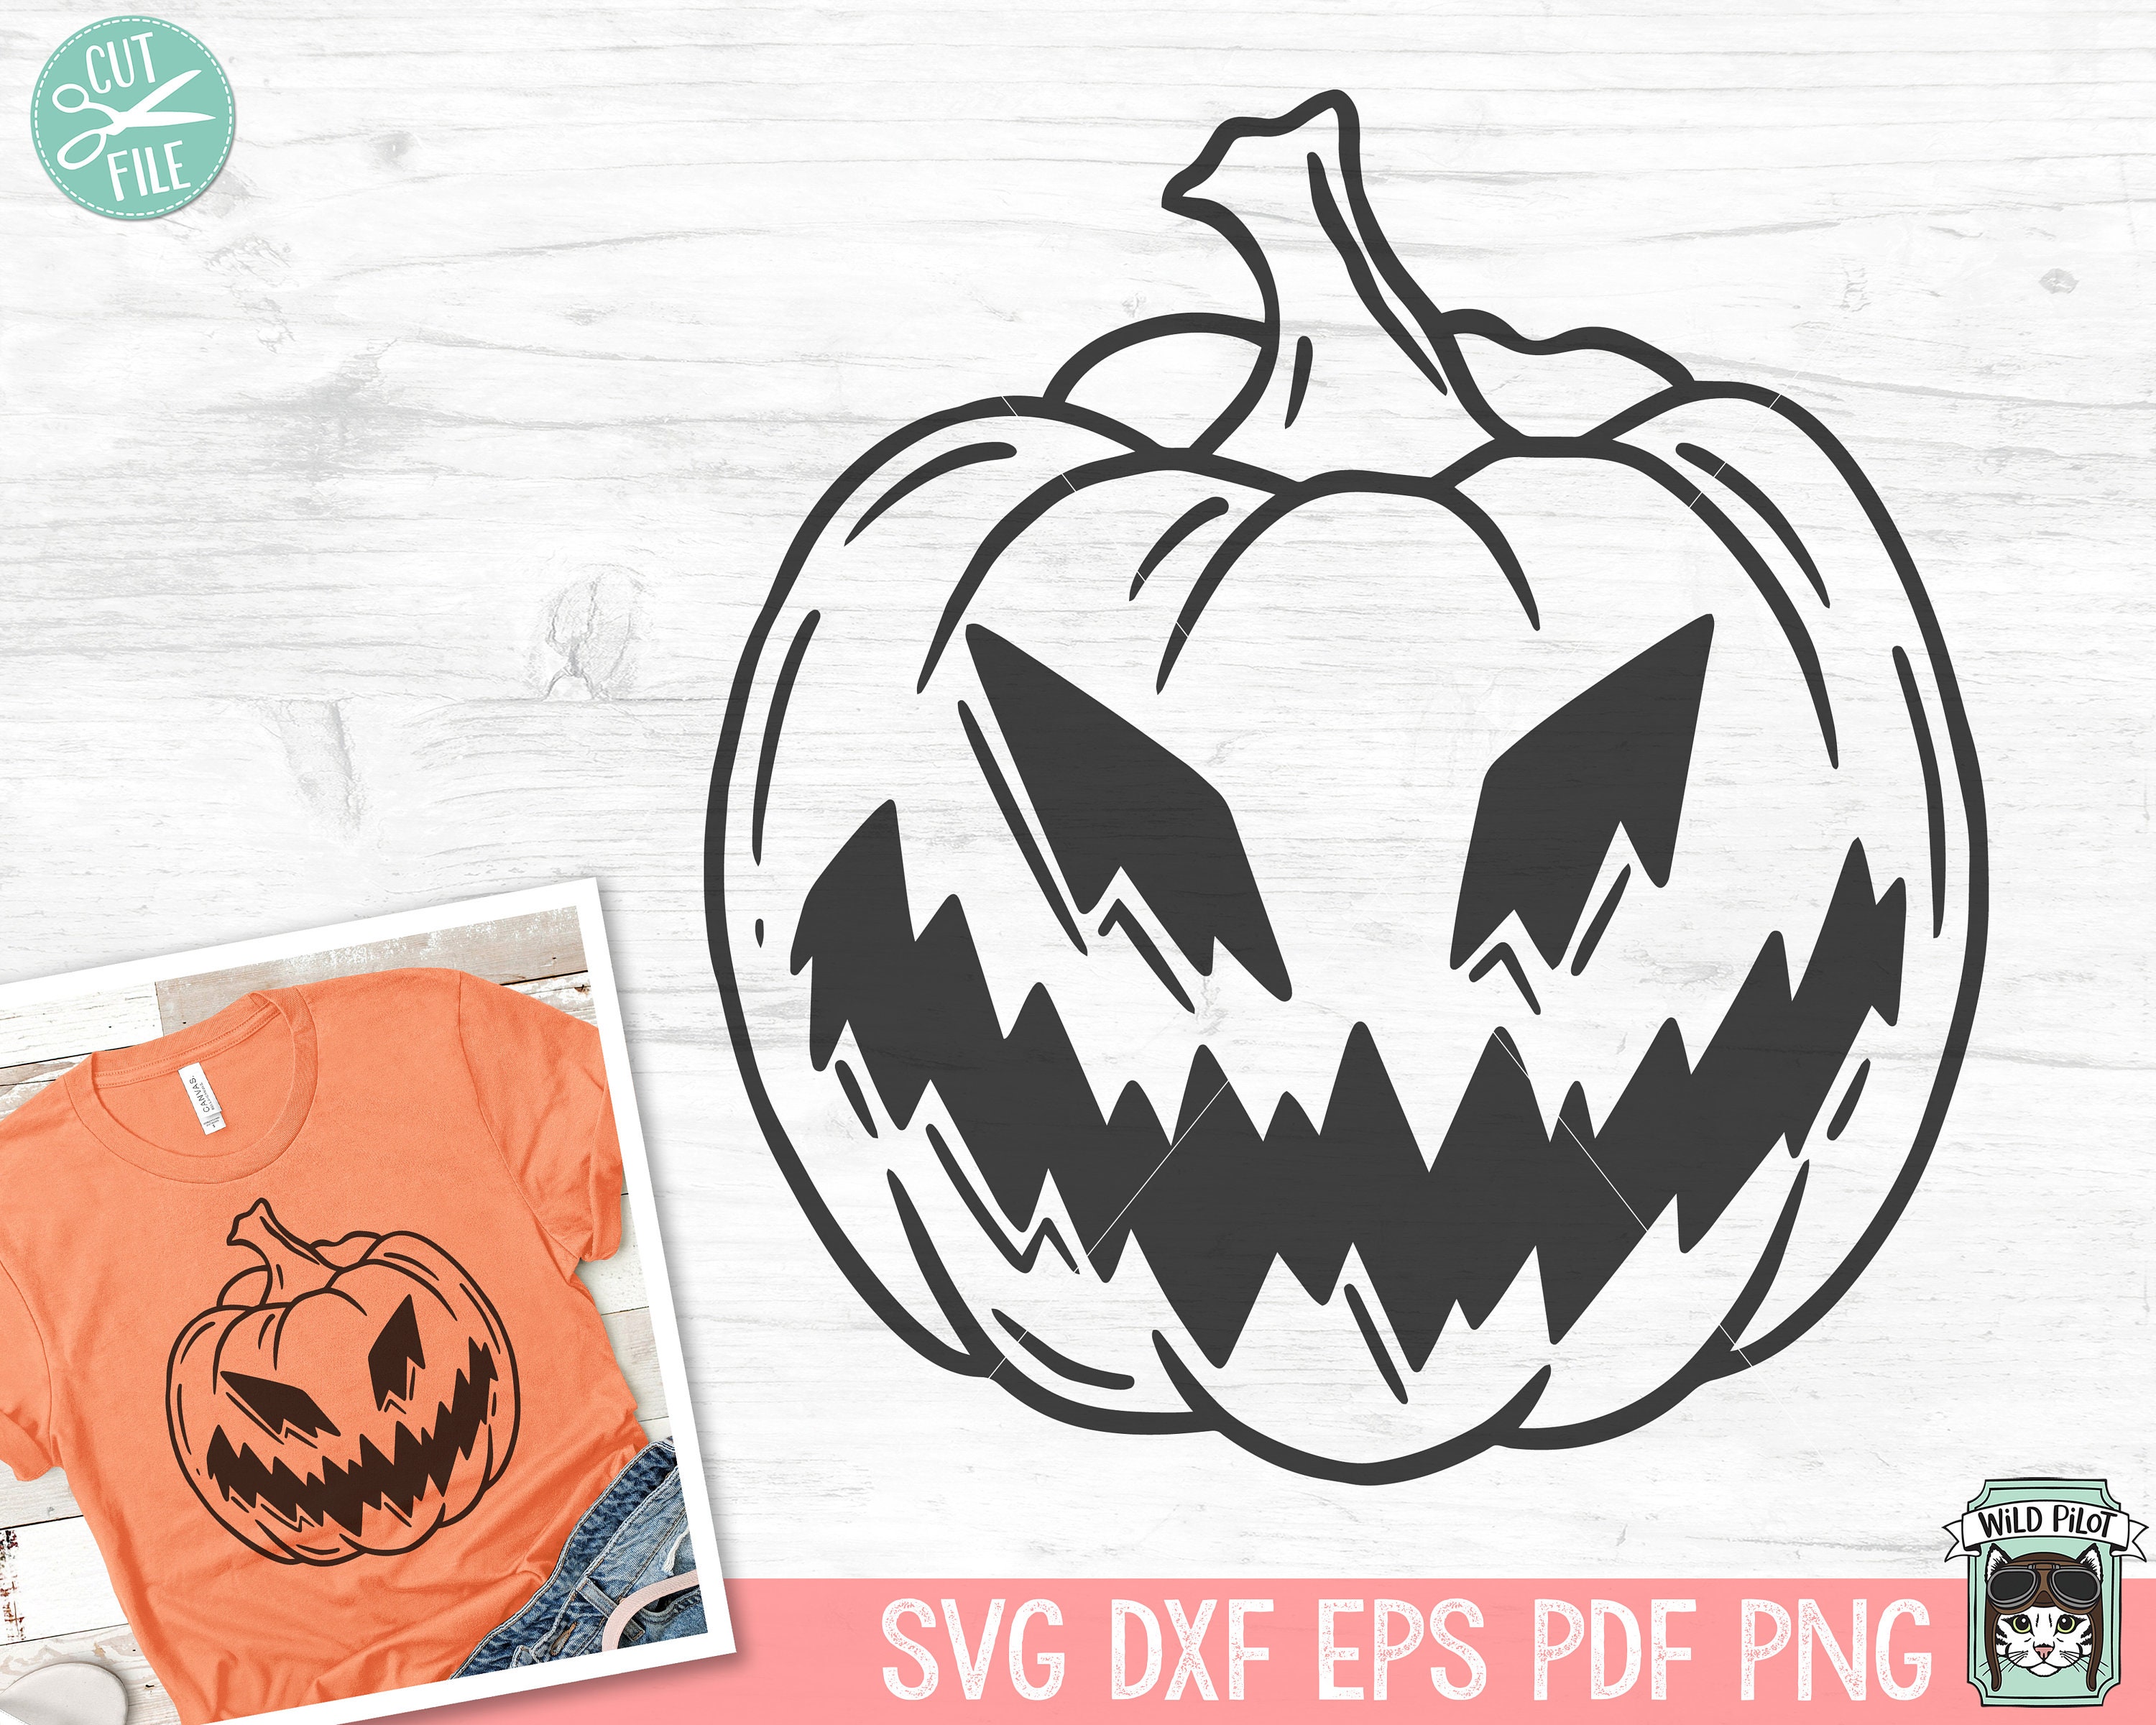 Scary face of halloween pumpkin or ghost on transparent PNG - Similar PNG